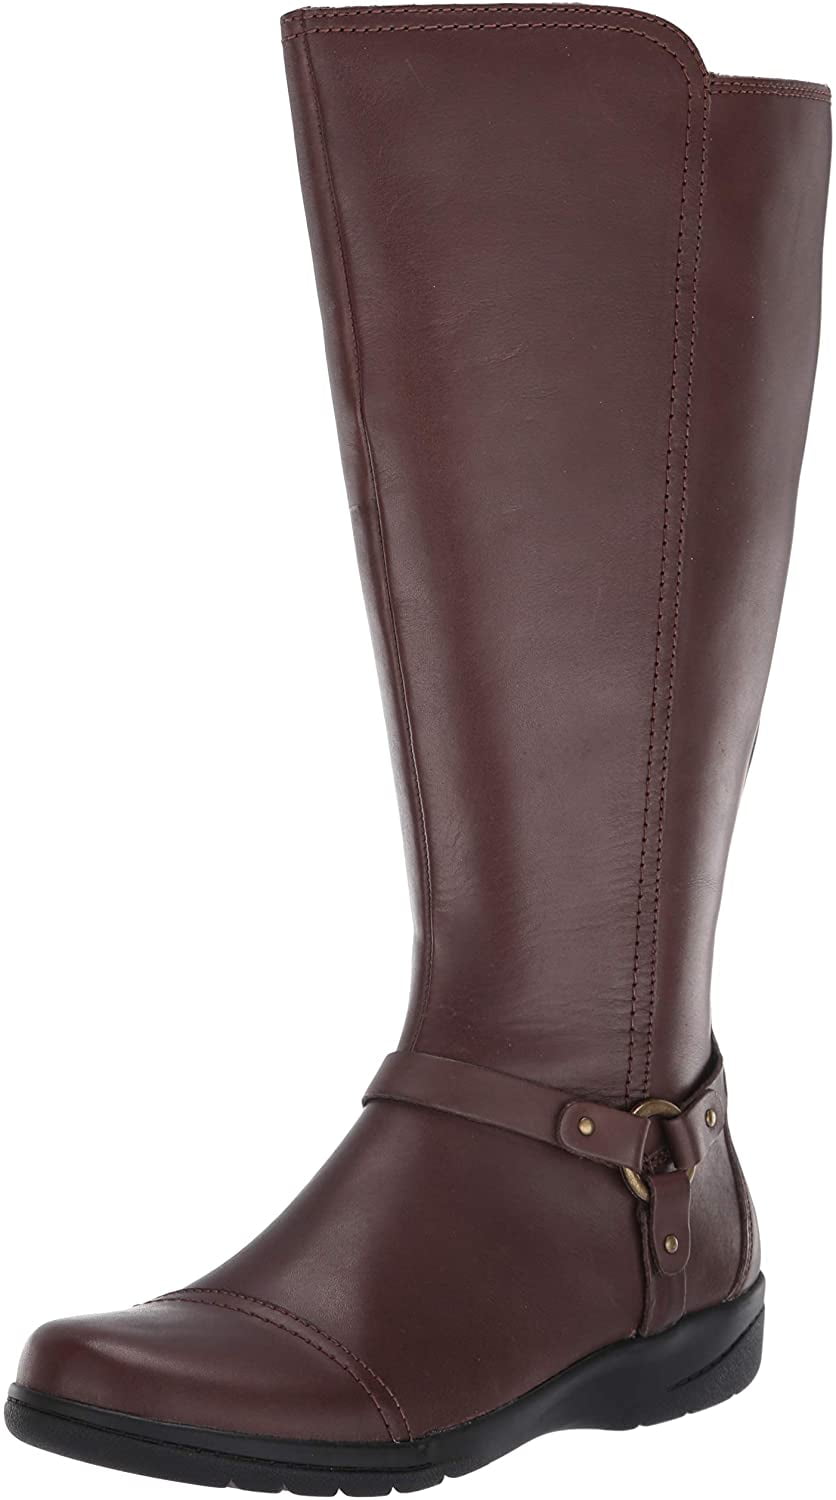 clarks knee high boots brown